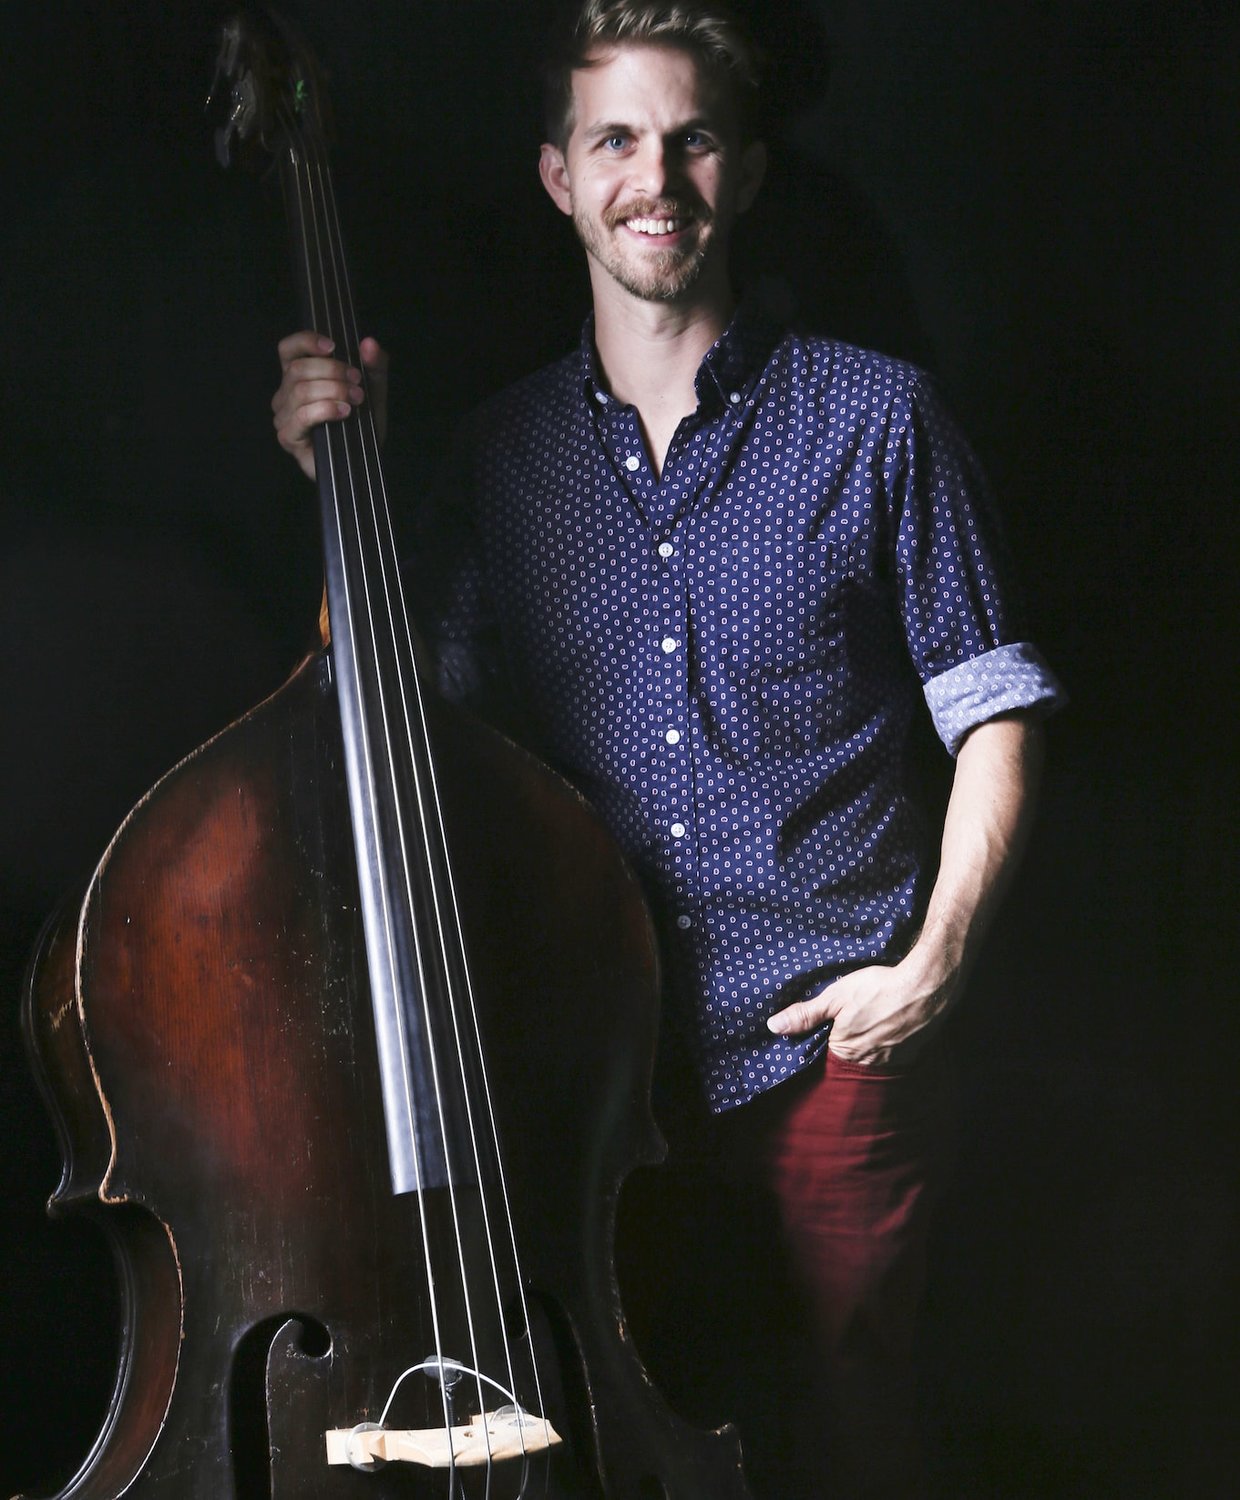 The Alex Lacquement Trio combines bluegrass and jazz music.